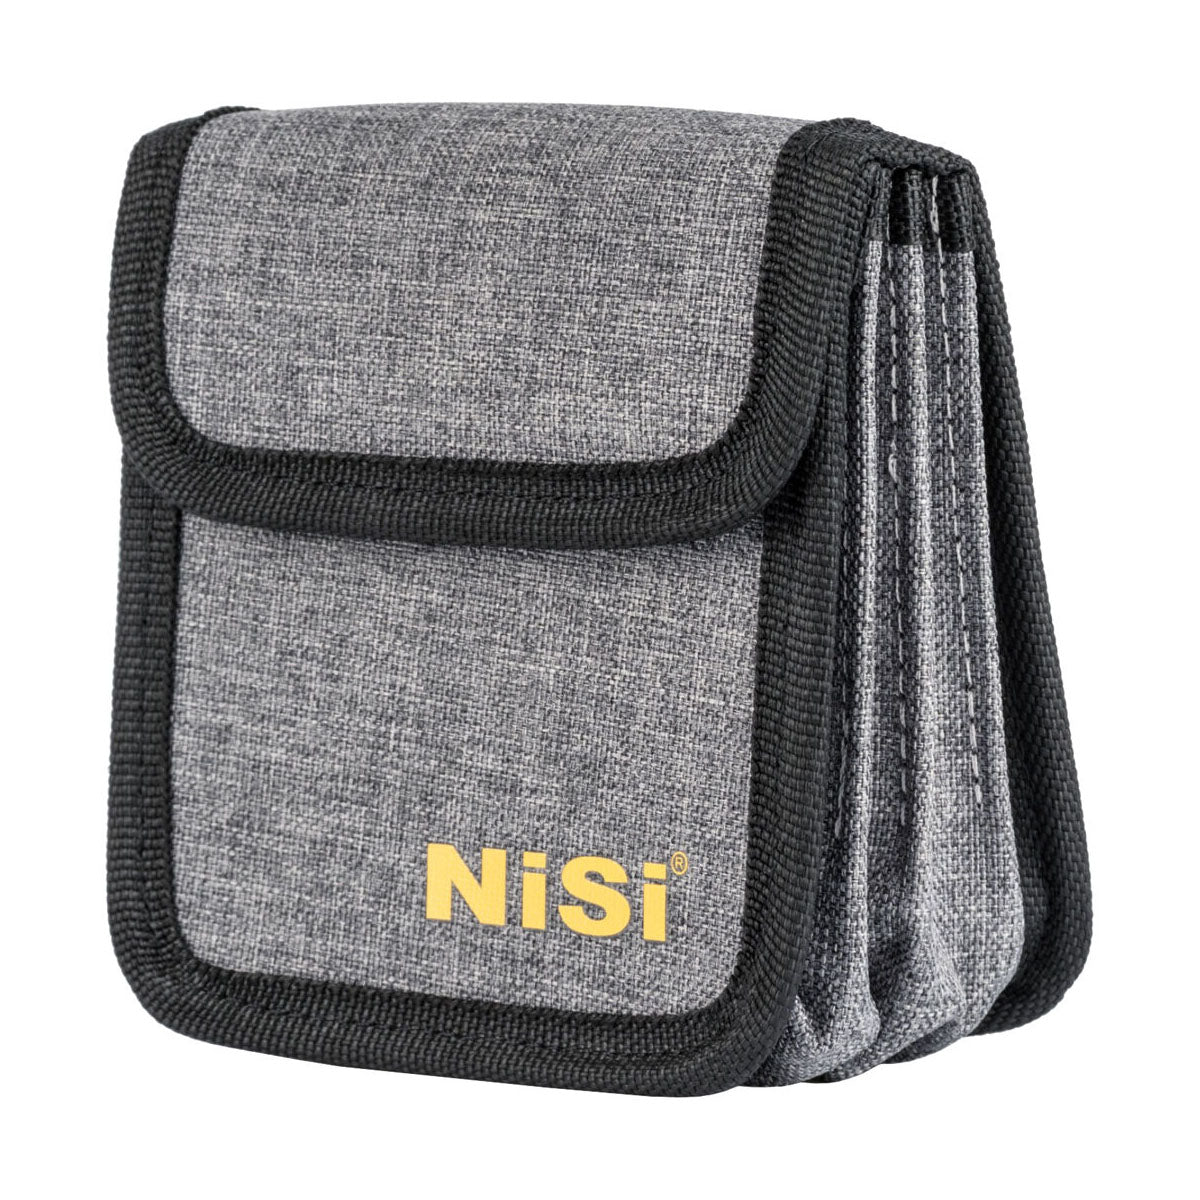 NiSi 77mm Professional Black Mist Kit with 1/2, 1/4, 1/8 and Case